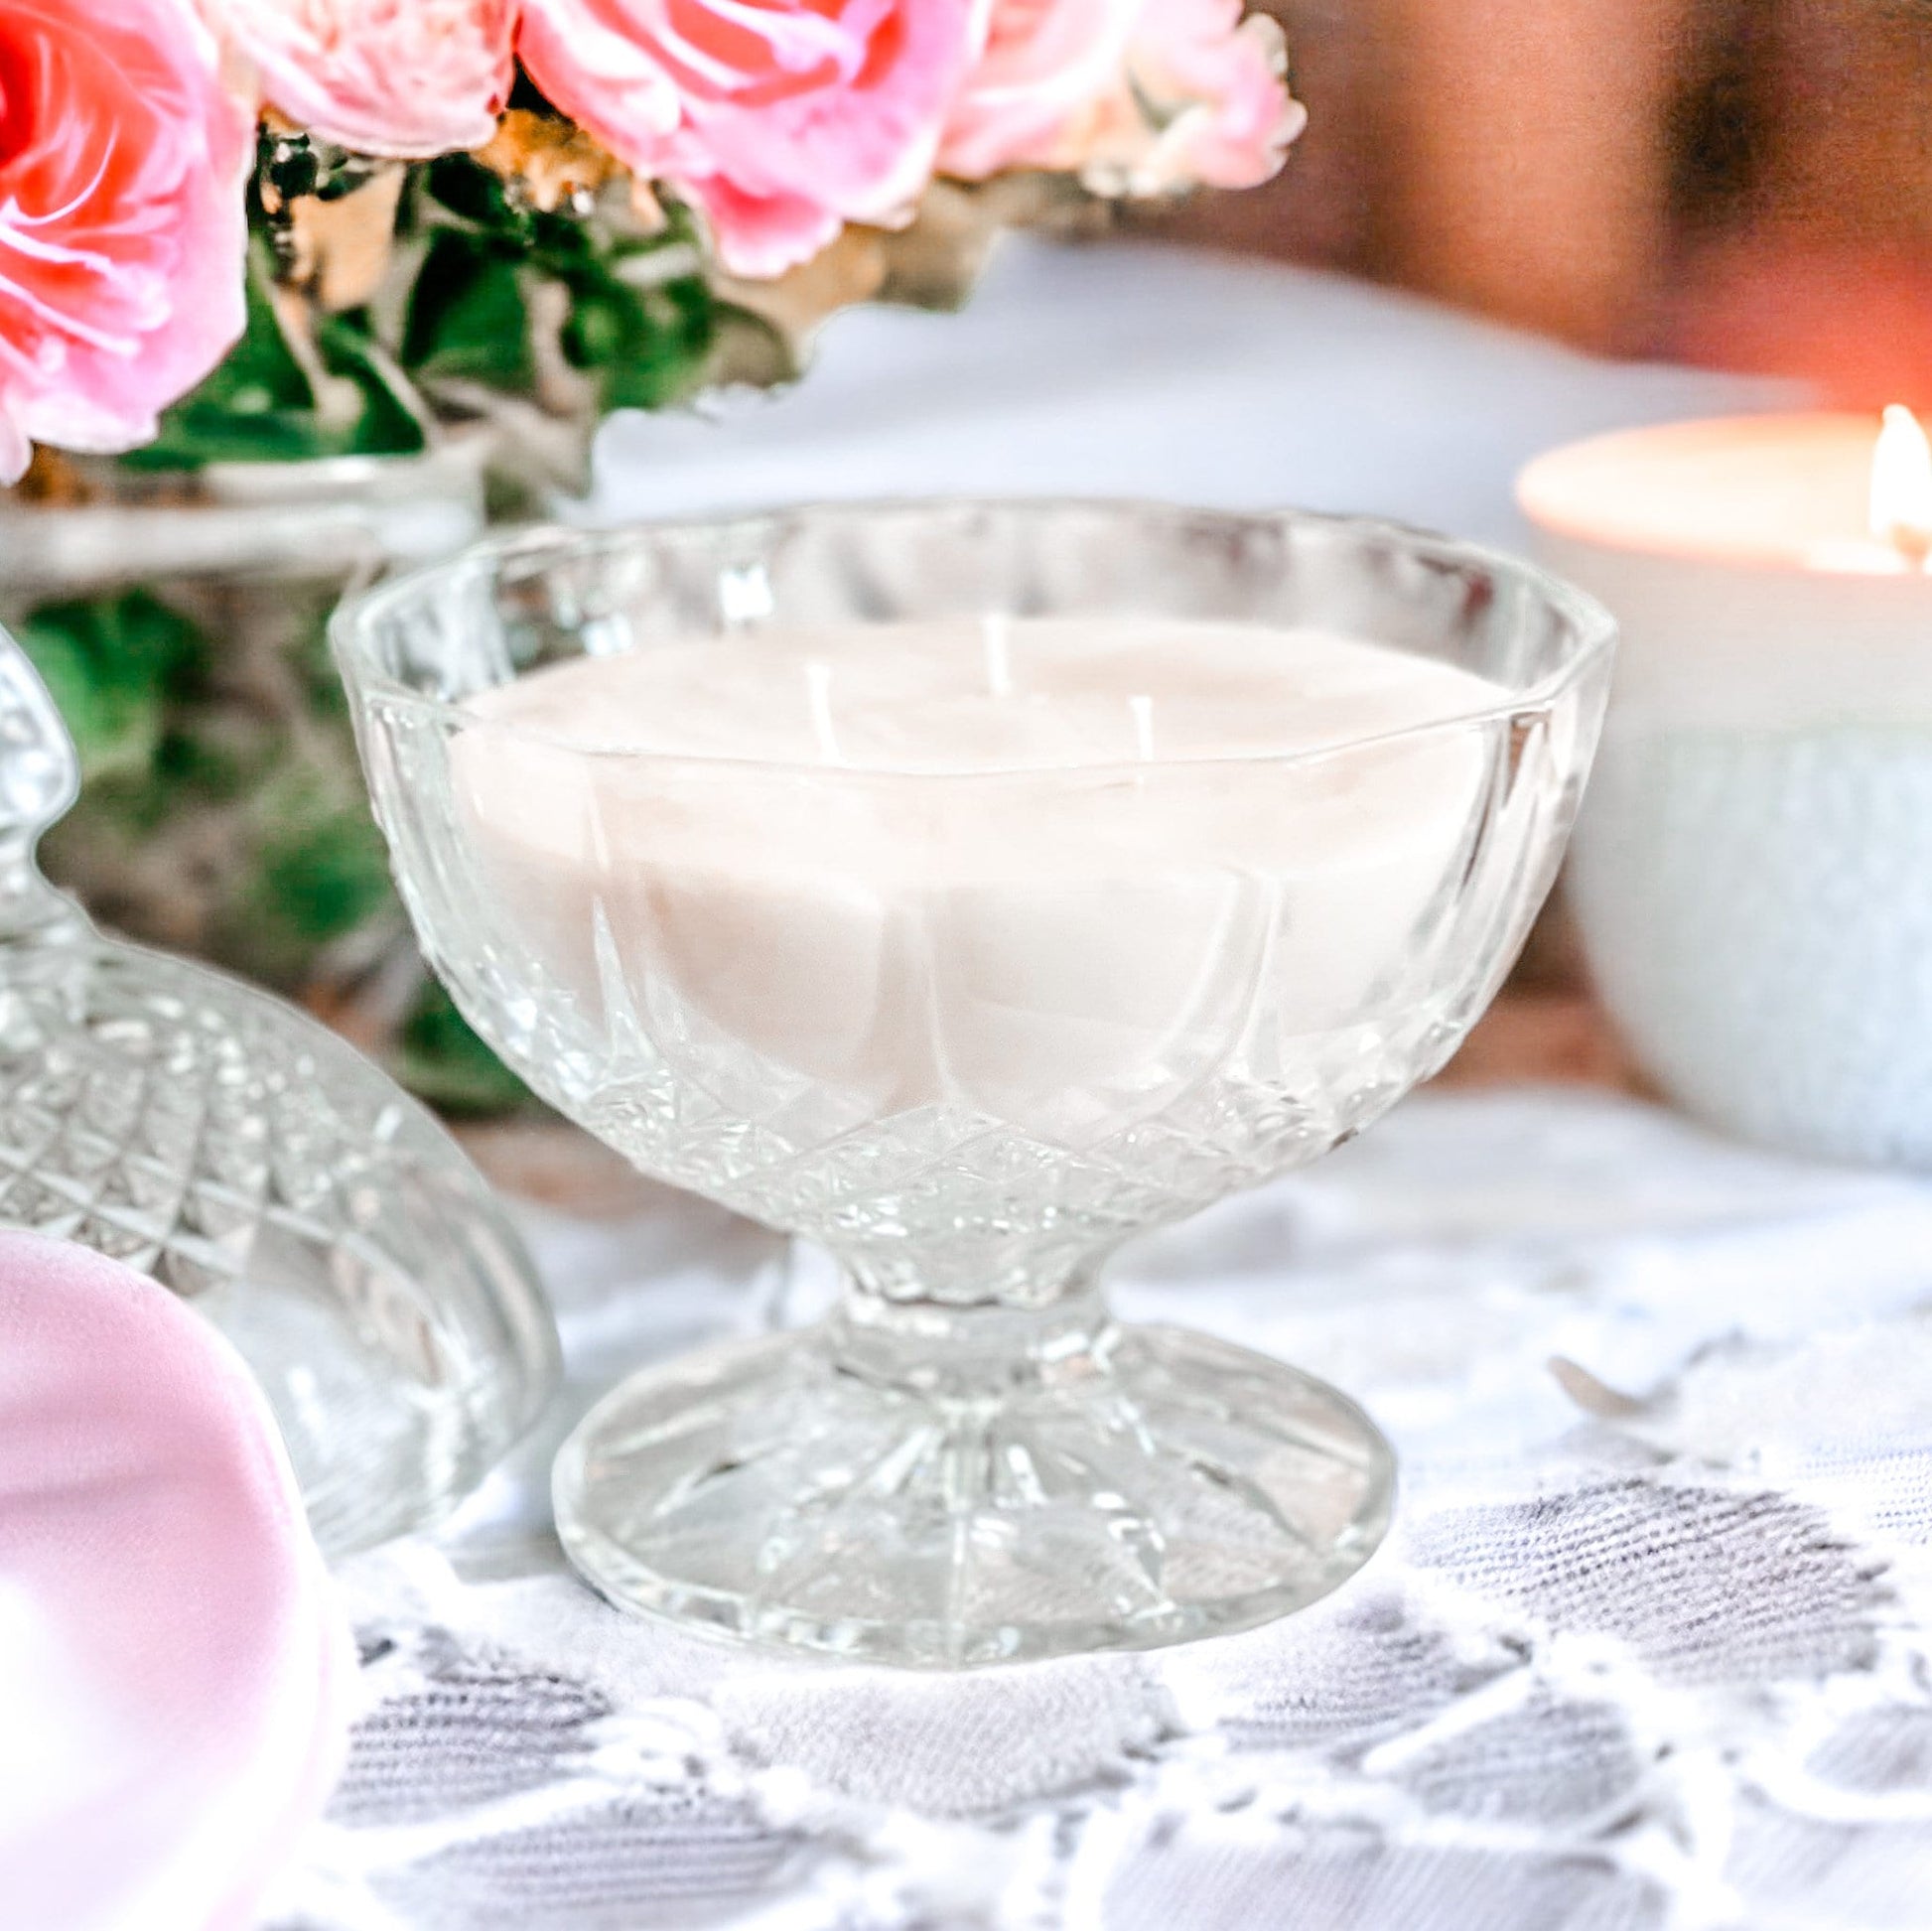 Soy Candle in Vintage Crystal Bombon Candy Bowl